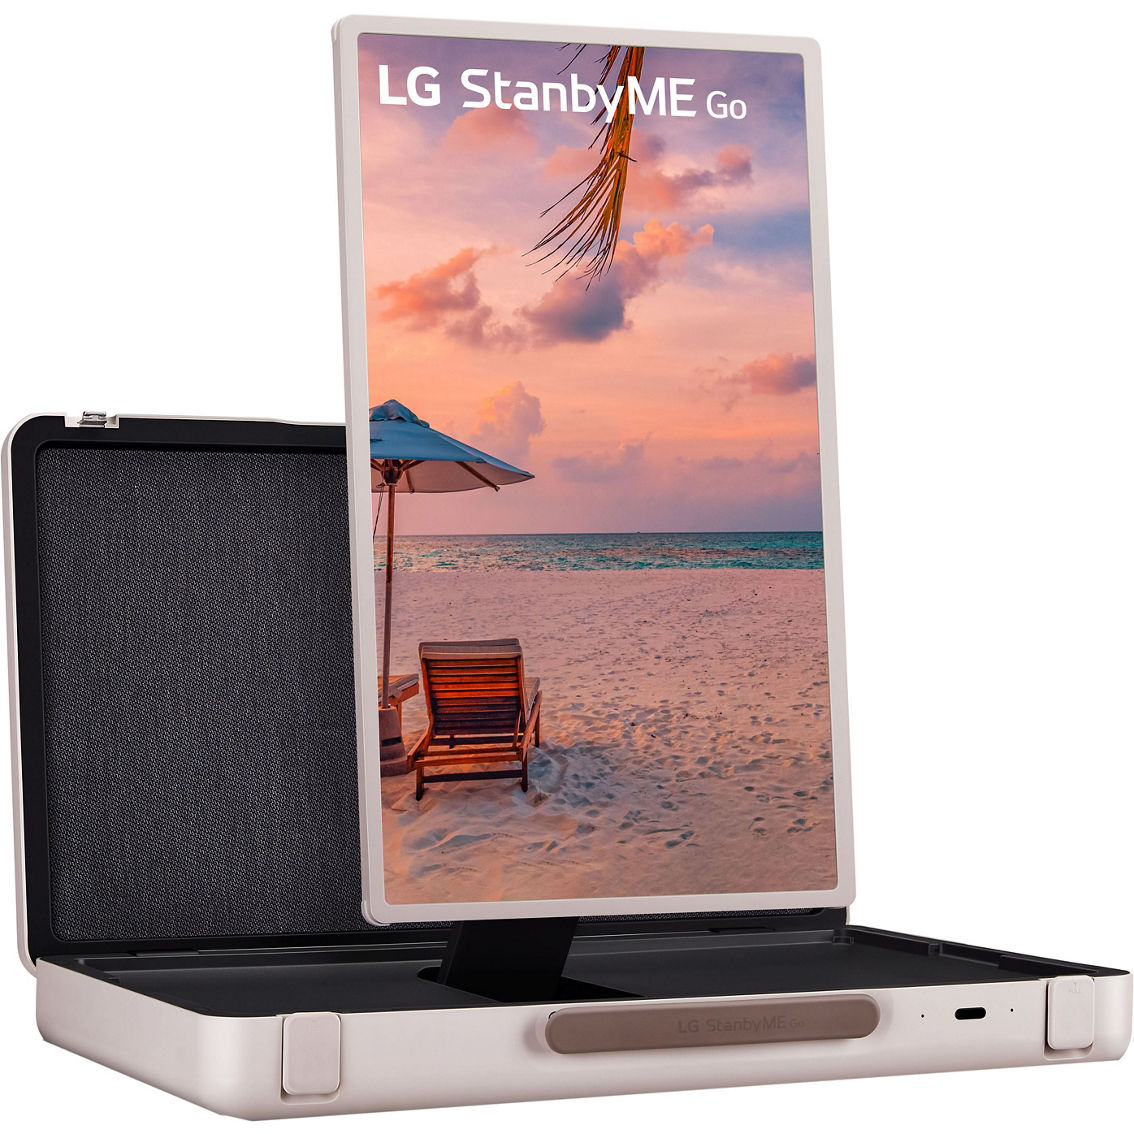 LG 27 in. StanbyME Go Portable Smart LED TV with Briefcase 27LX5QKNA - Image 8 of 10